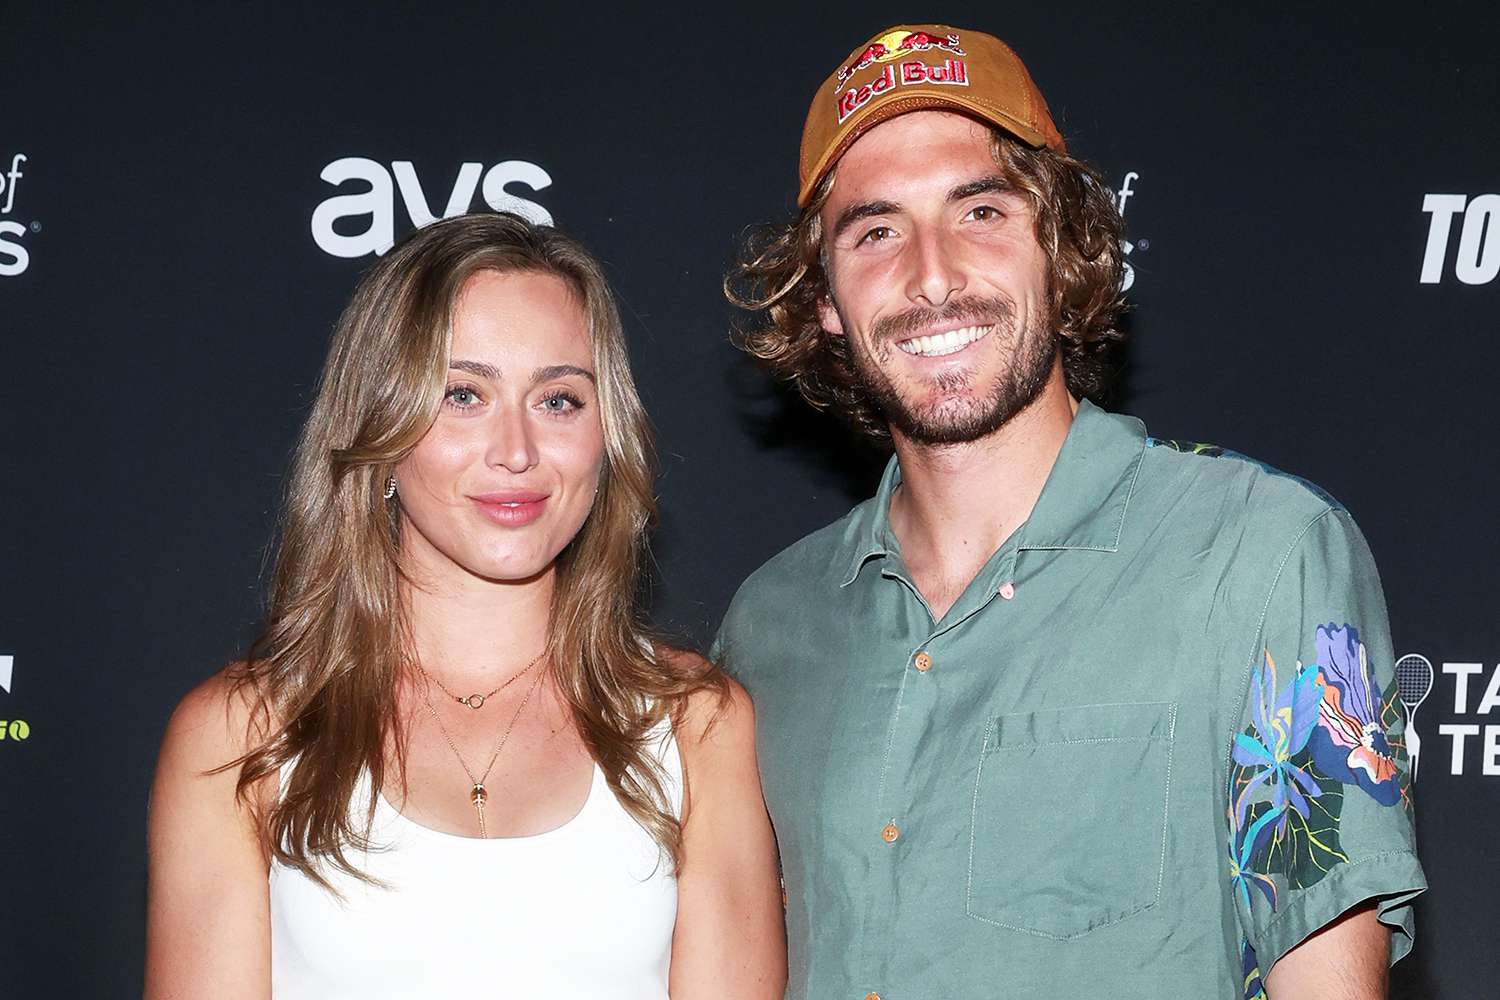 Tennis Stars Paula Badosa and Stefanos Tsitsipas Back Together After Split, Playing Mixed Doubles at French Open